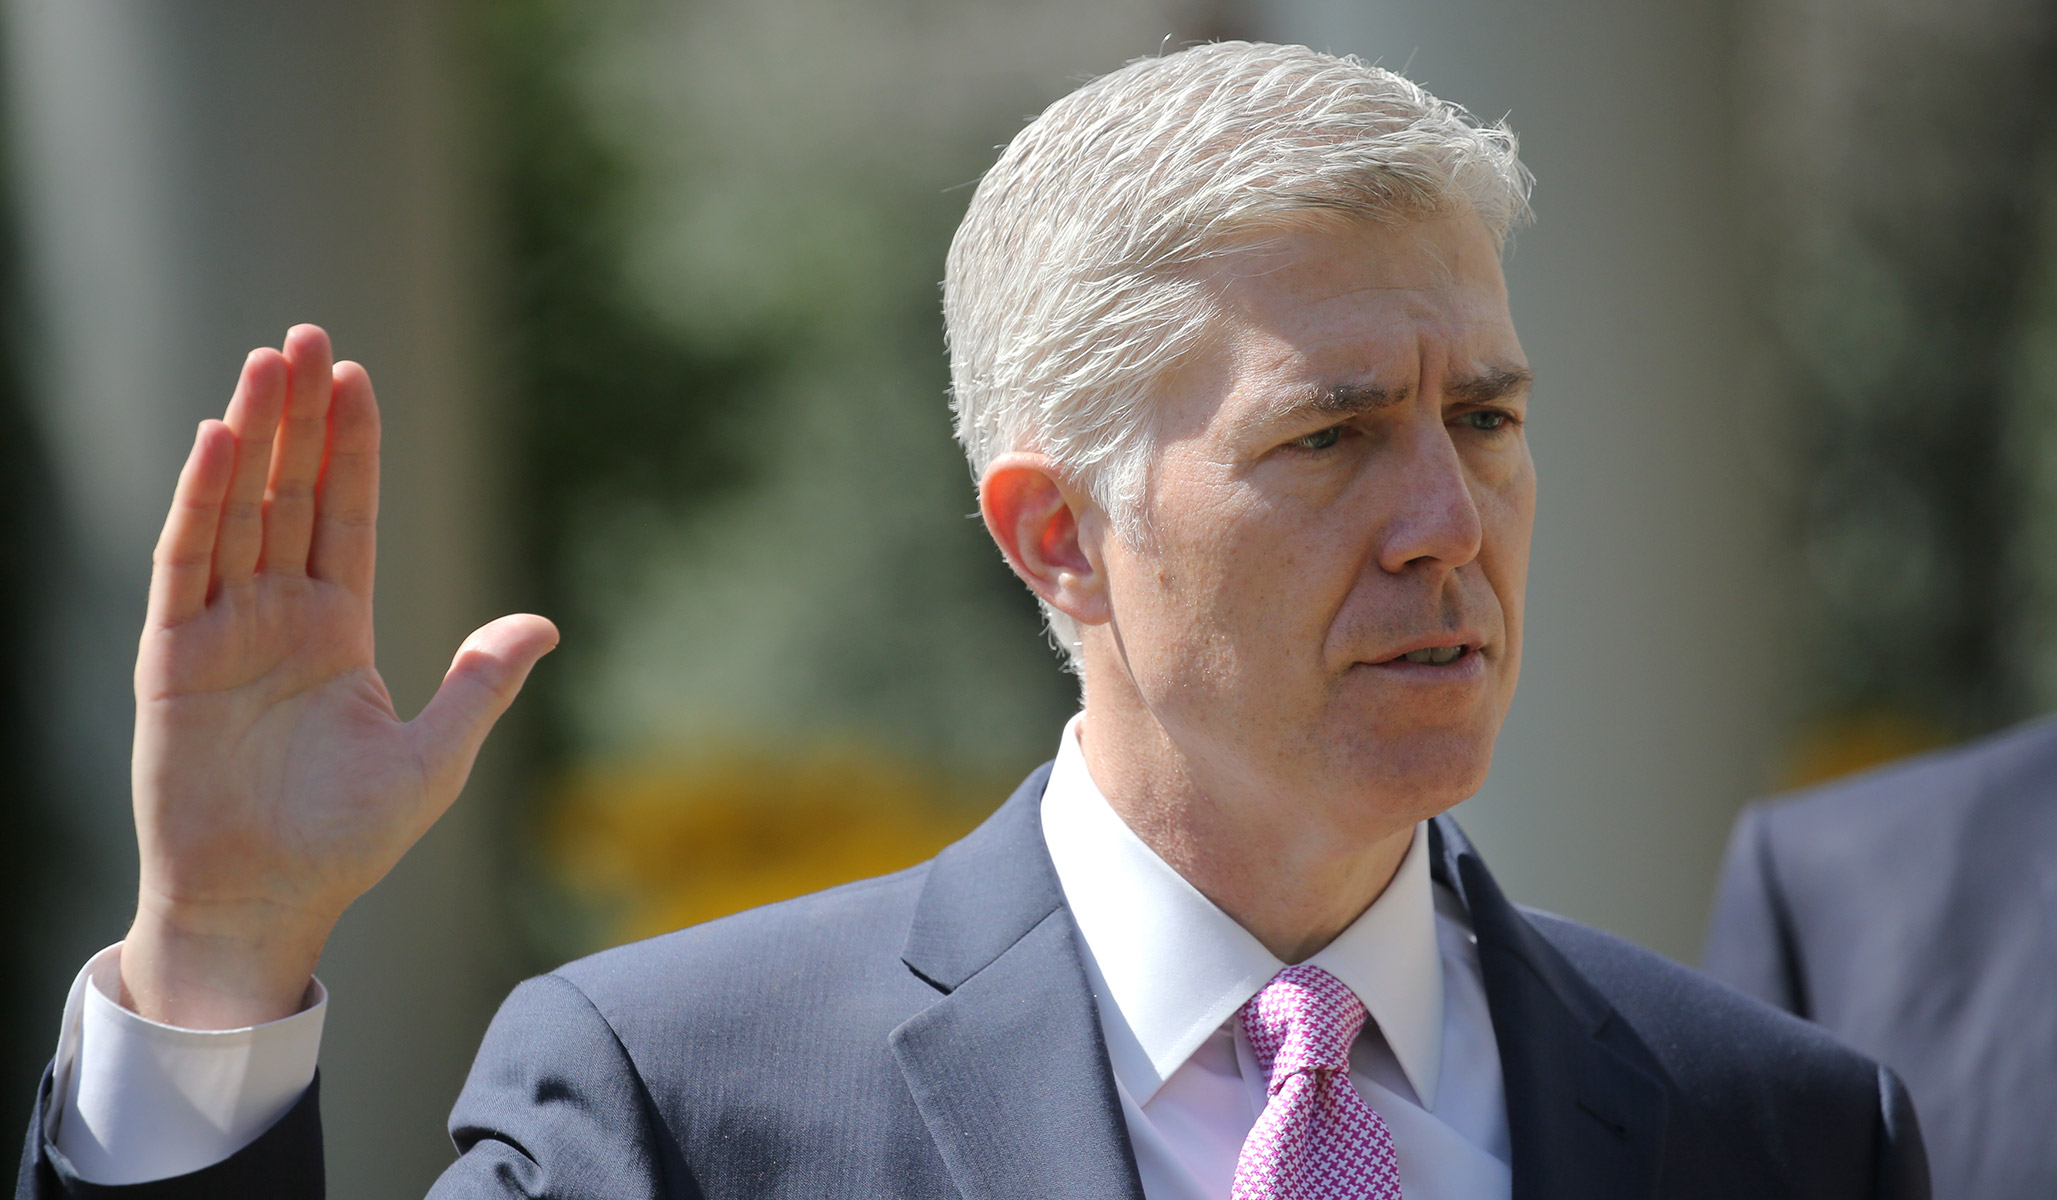 Justices Sotomayor, Gorsuch Deny Reported Clash over Mask-Wearing